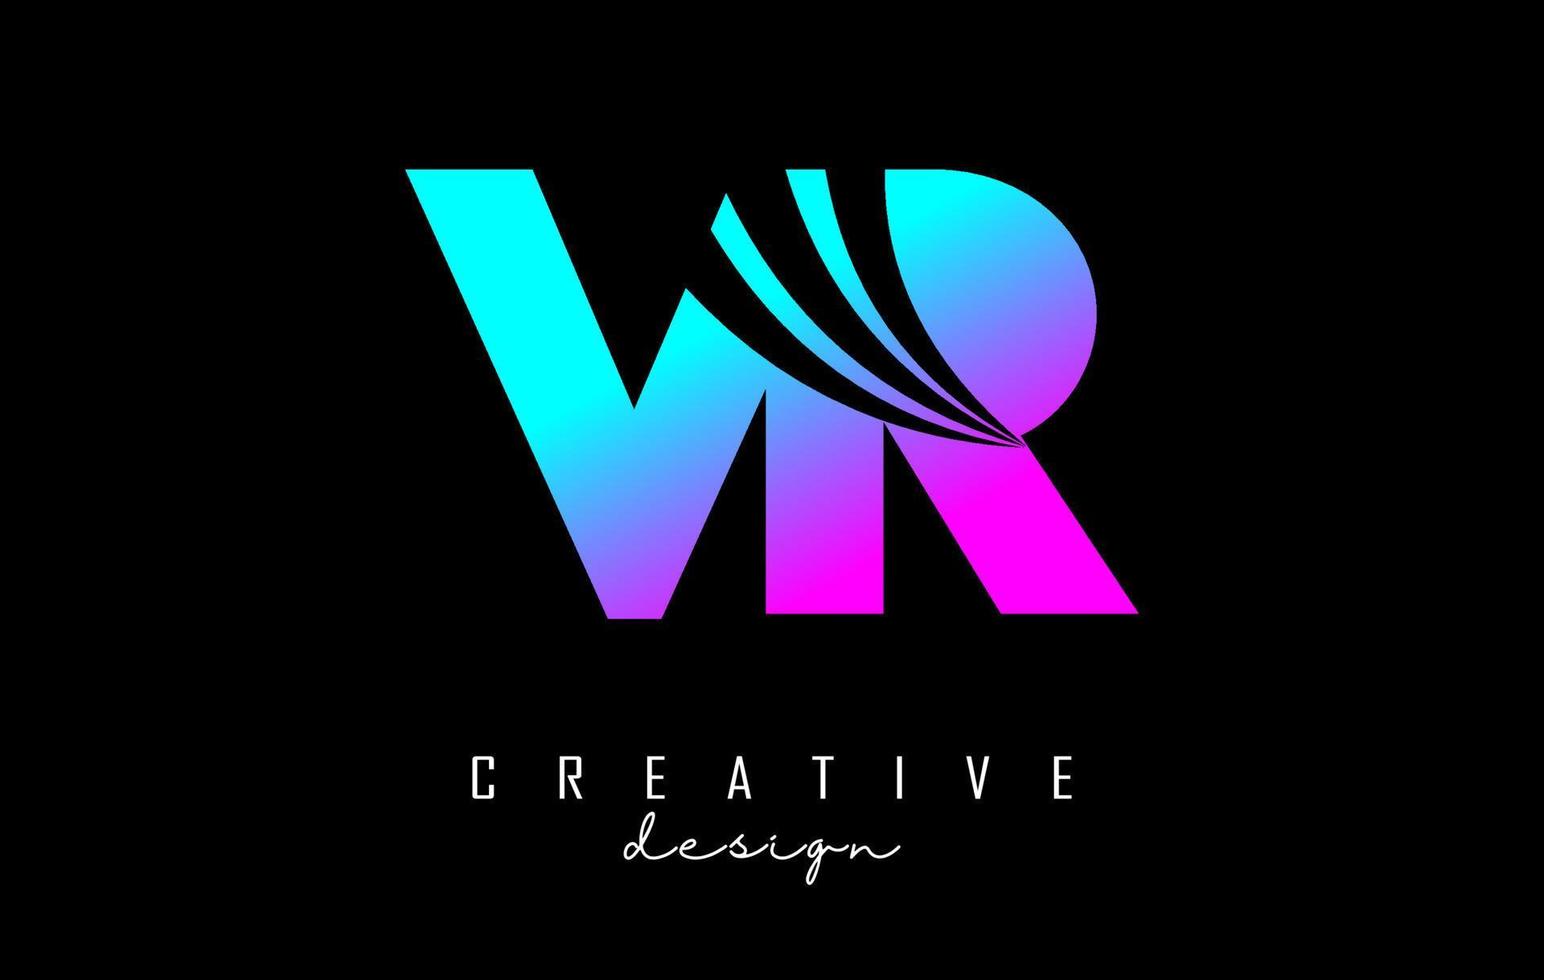 Creative colorful letters VR v r logo with leading lines and road concept design. Letters with geometric design. vector